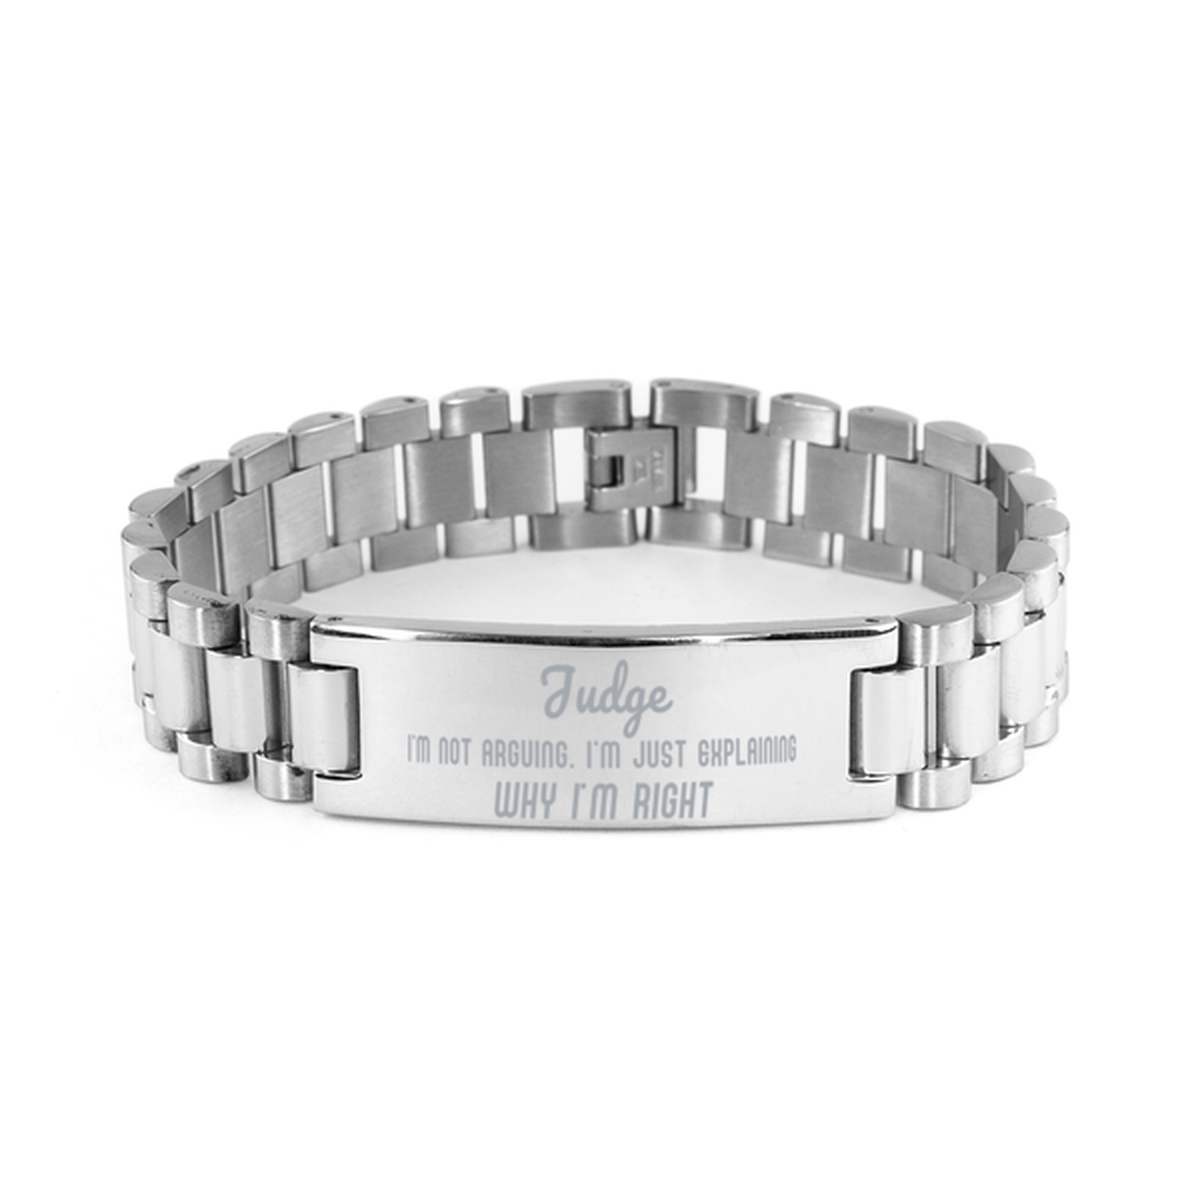 Judge I'm not Arguing. I'm Just Explaining Why I'm RIGHT Ladder Stainless Steel Bracelet, Graduation Birthday Christmas Judge Gifts For Judge Funny Saying Quote Present for Men Women Coworker